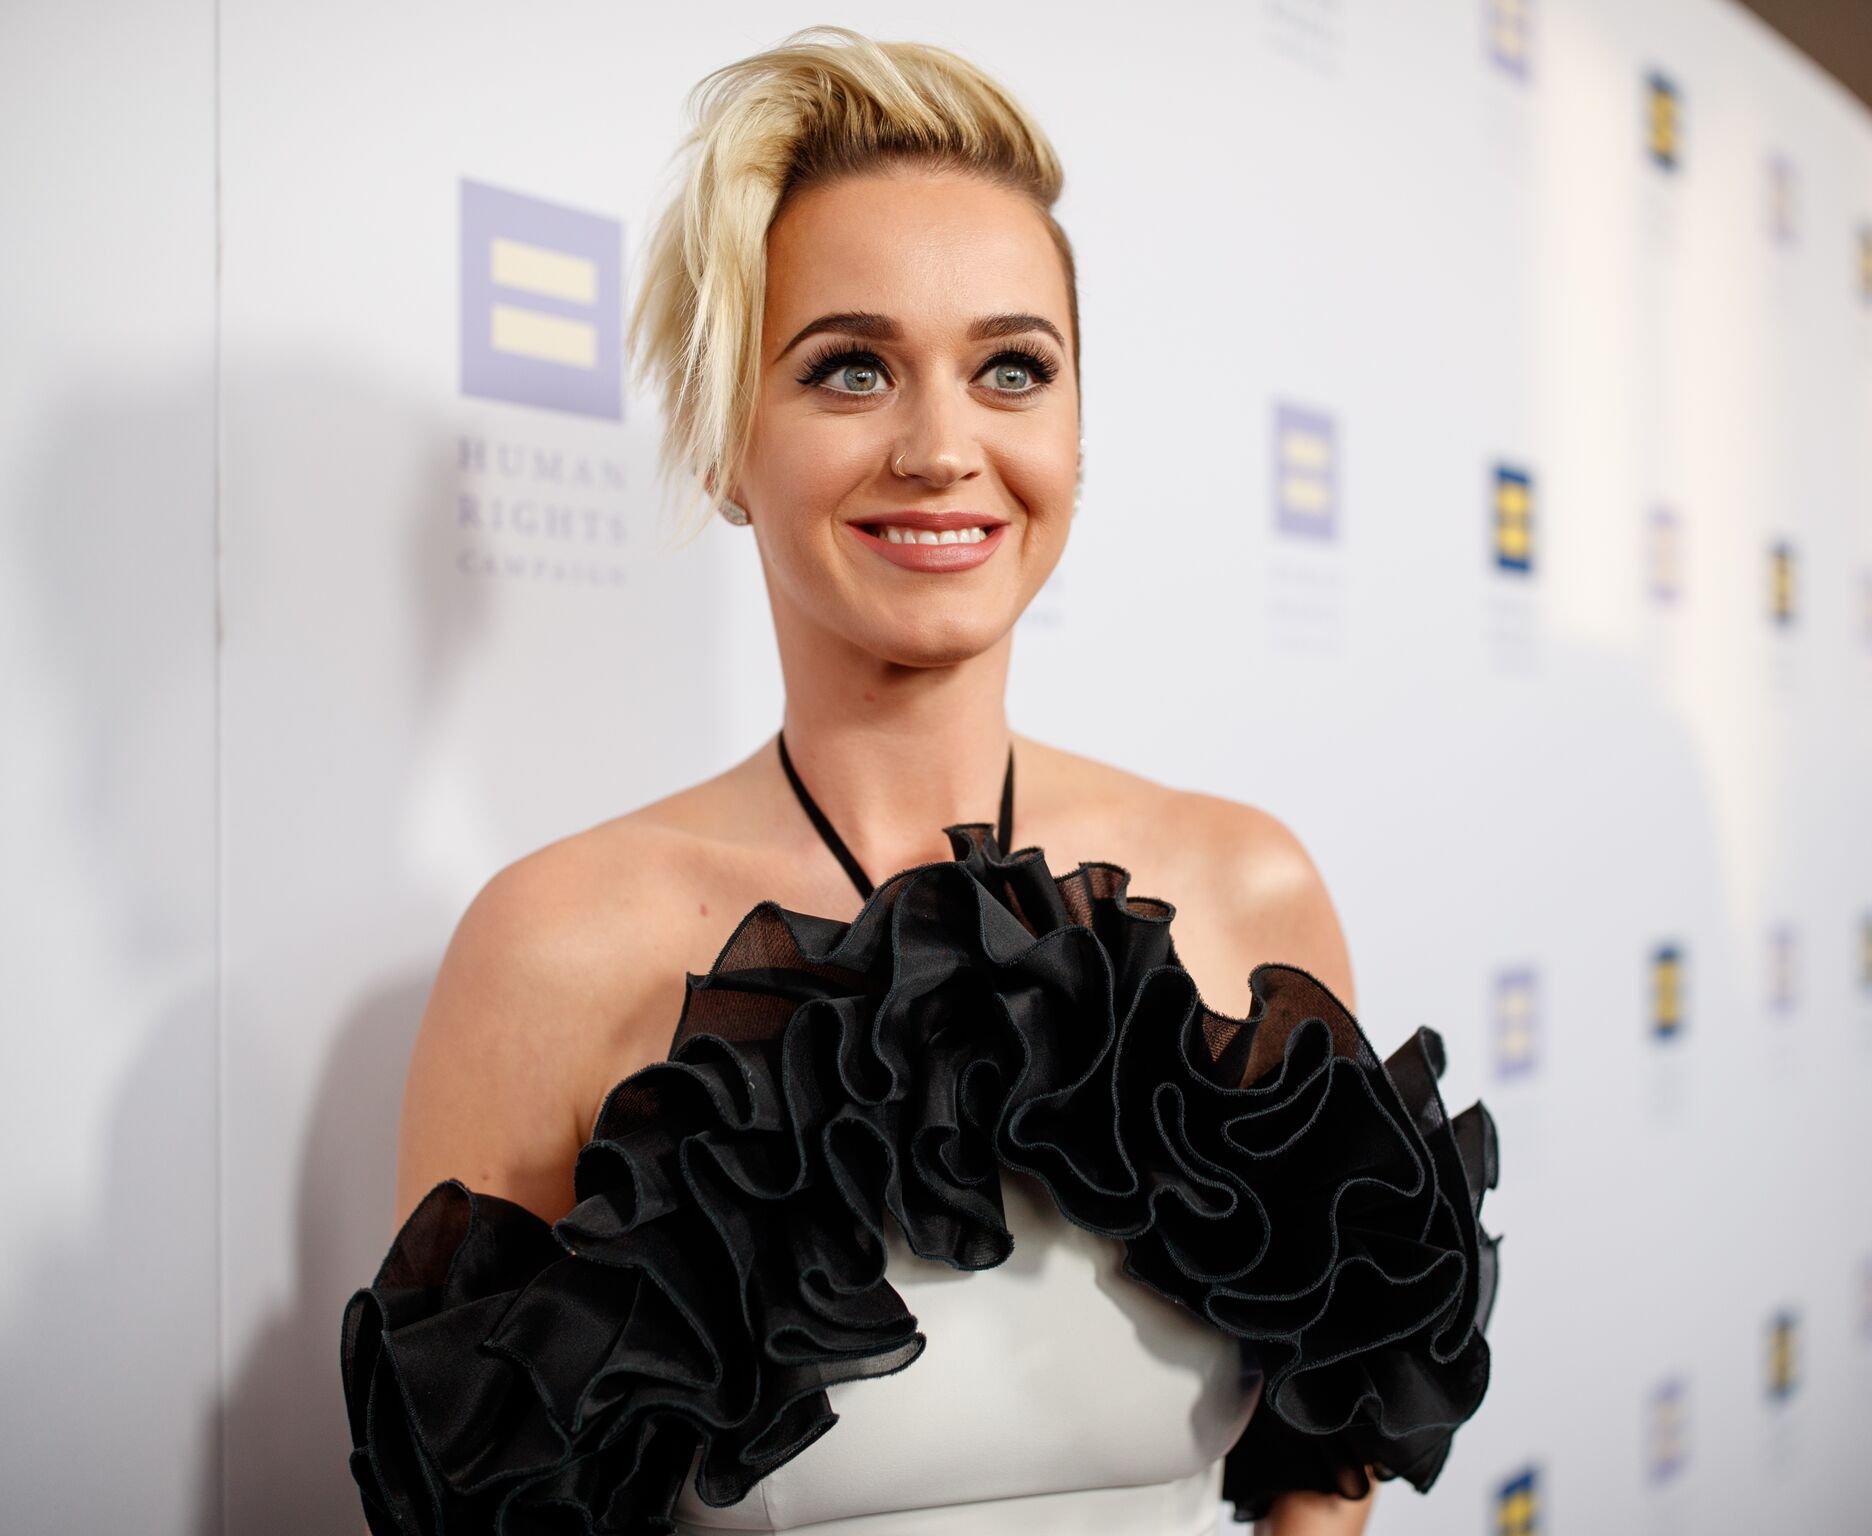 Singer Katy Perry arrives to The Human Rights Campaign 2017 Los Angeles Gala Dinner at JW Marriott Los Angeles at L.A. LIVE on March 18, 2017 | Photo: Getty Images